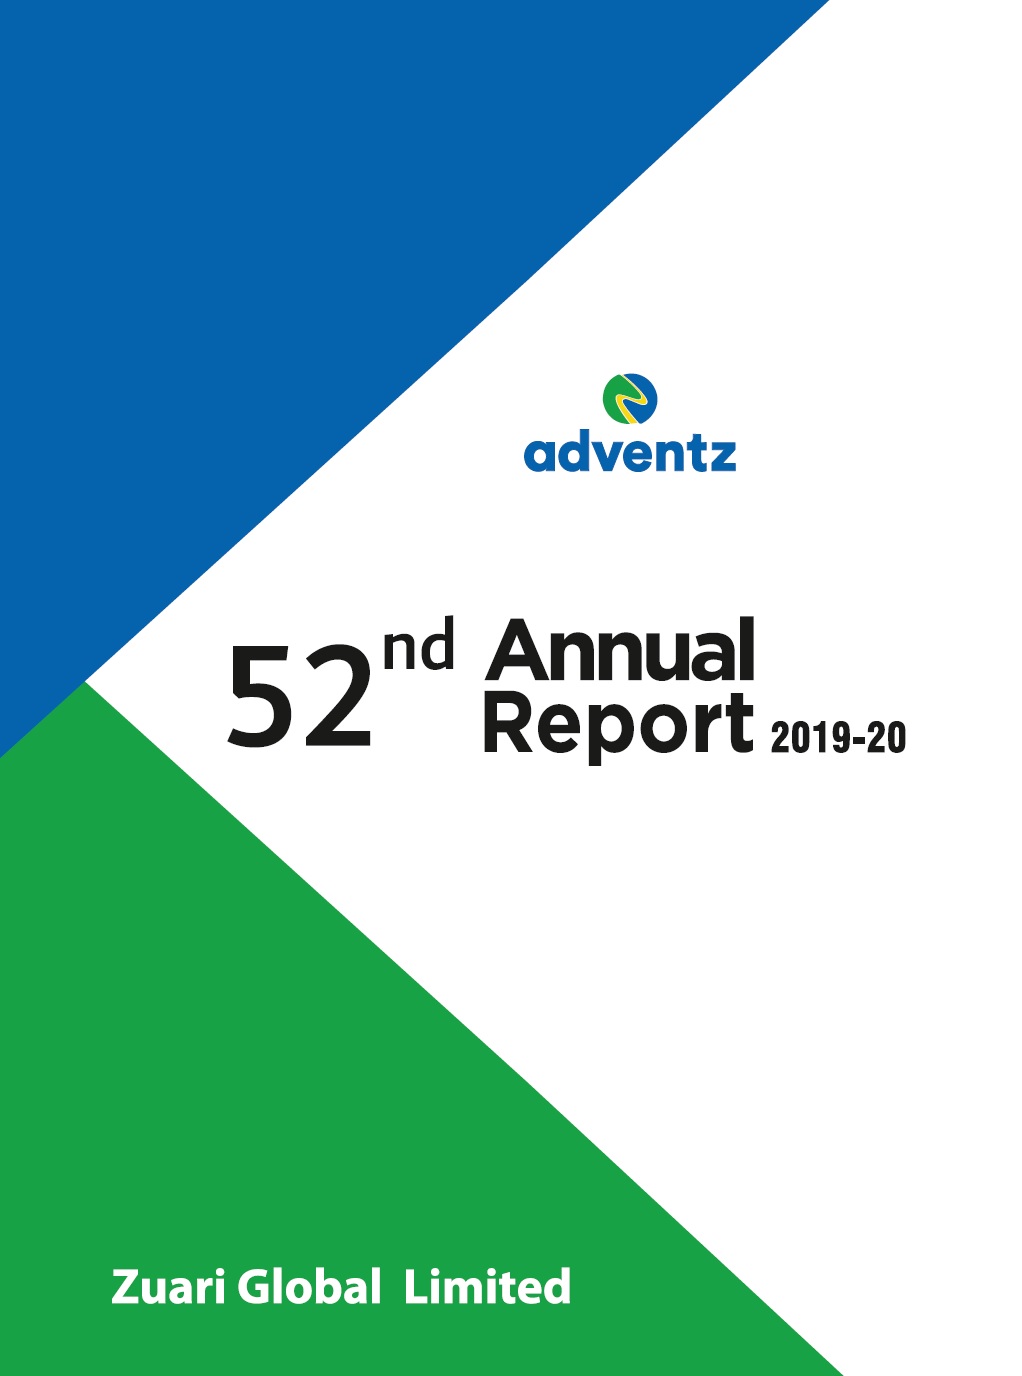 ZIL ANNUAL REPORT 2019-20